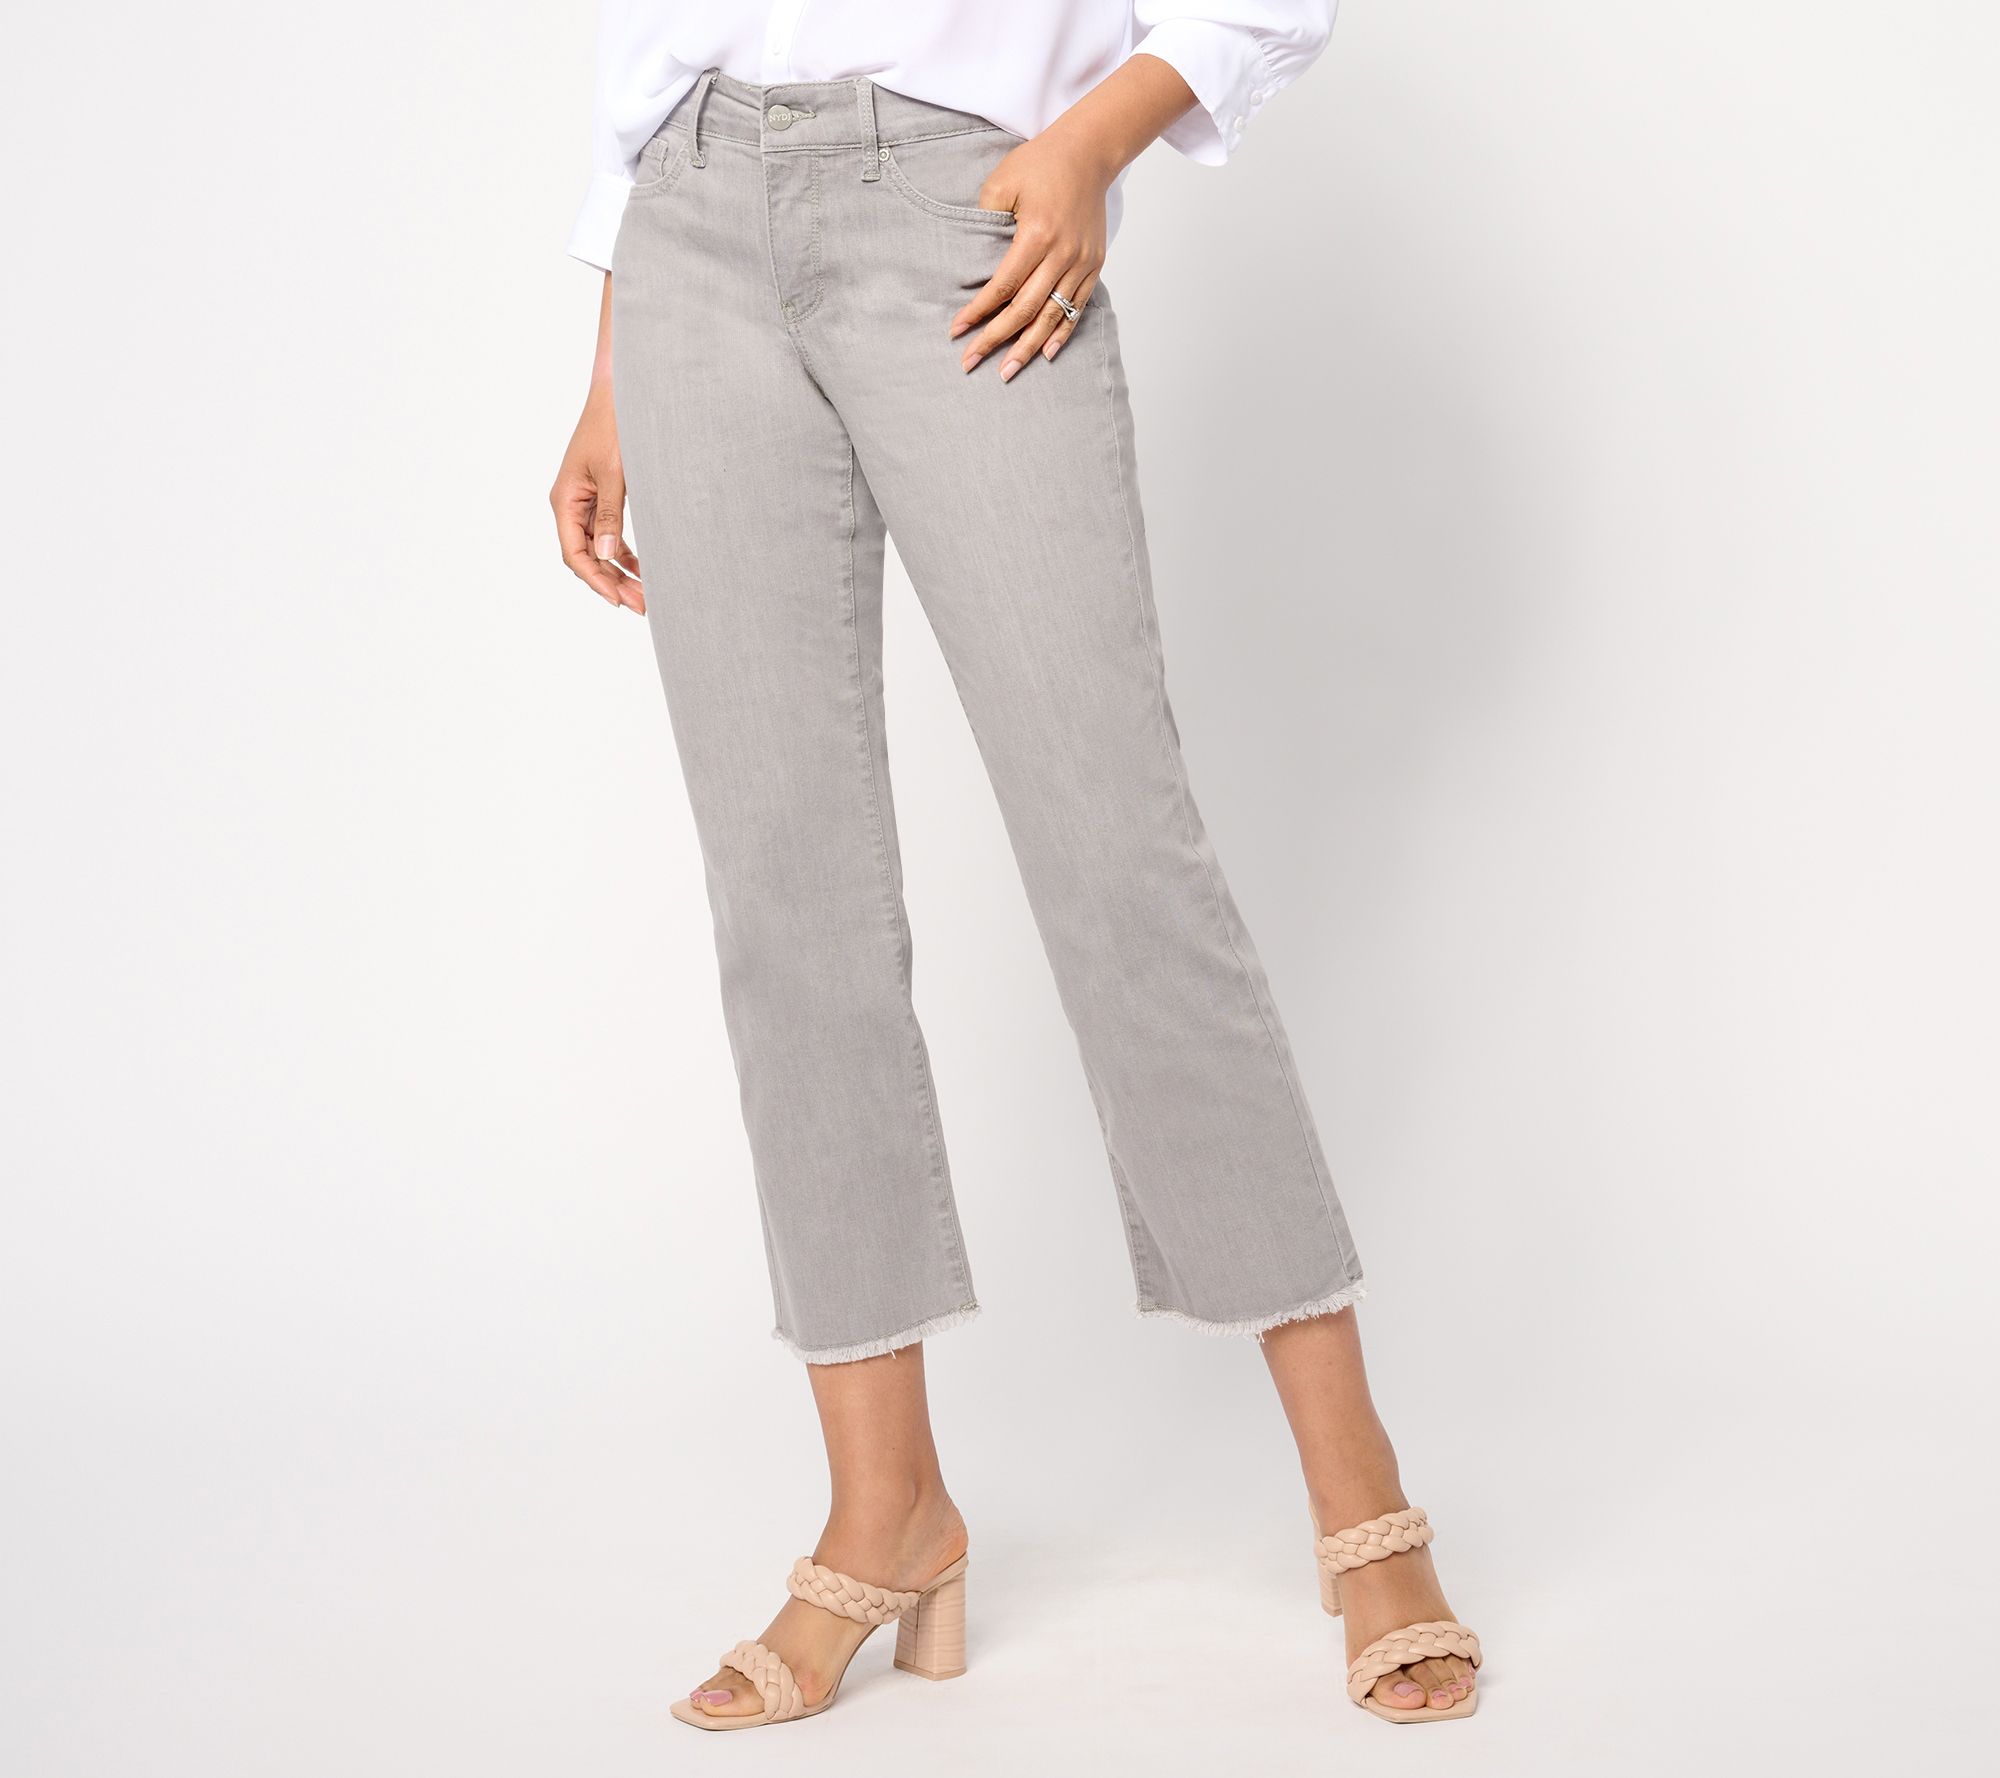 Marilyn Straight Crop Jeans In Cool Embrace® Denim With Cuffs - Mauve Haze  Purple